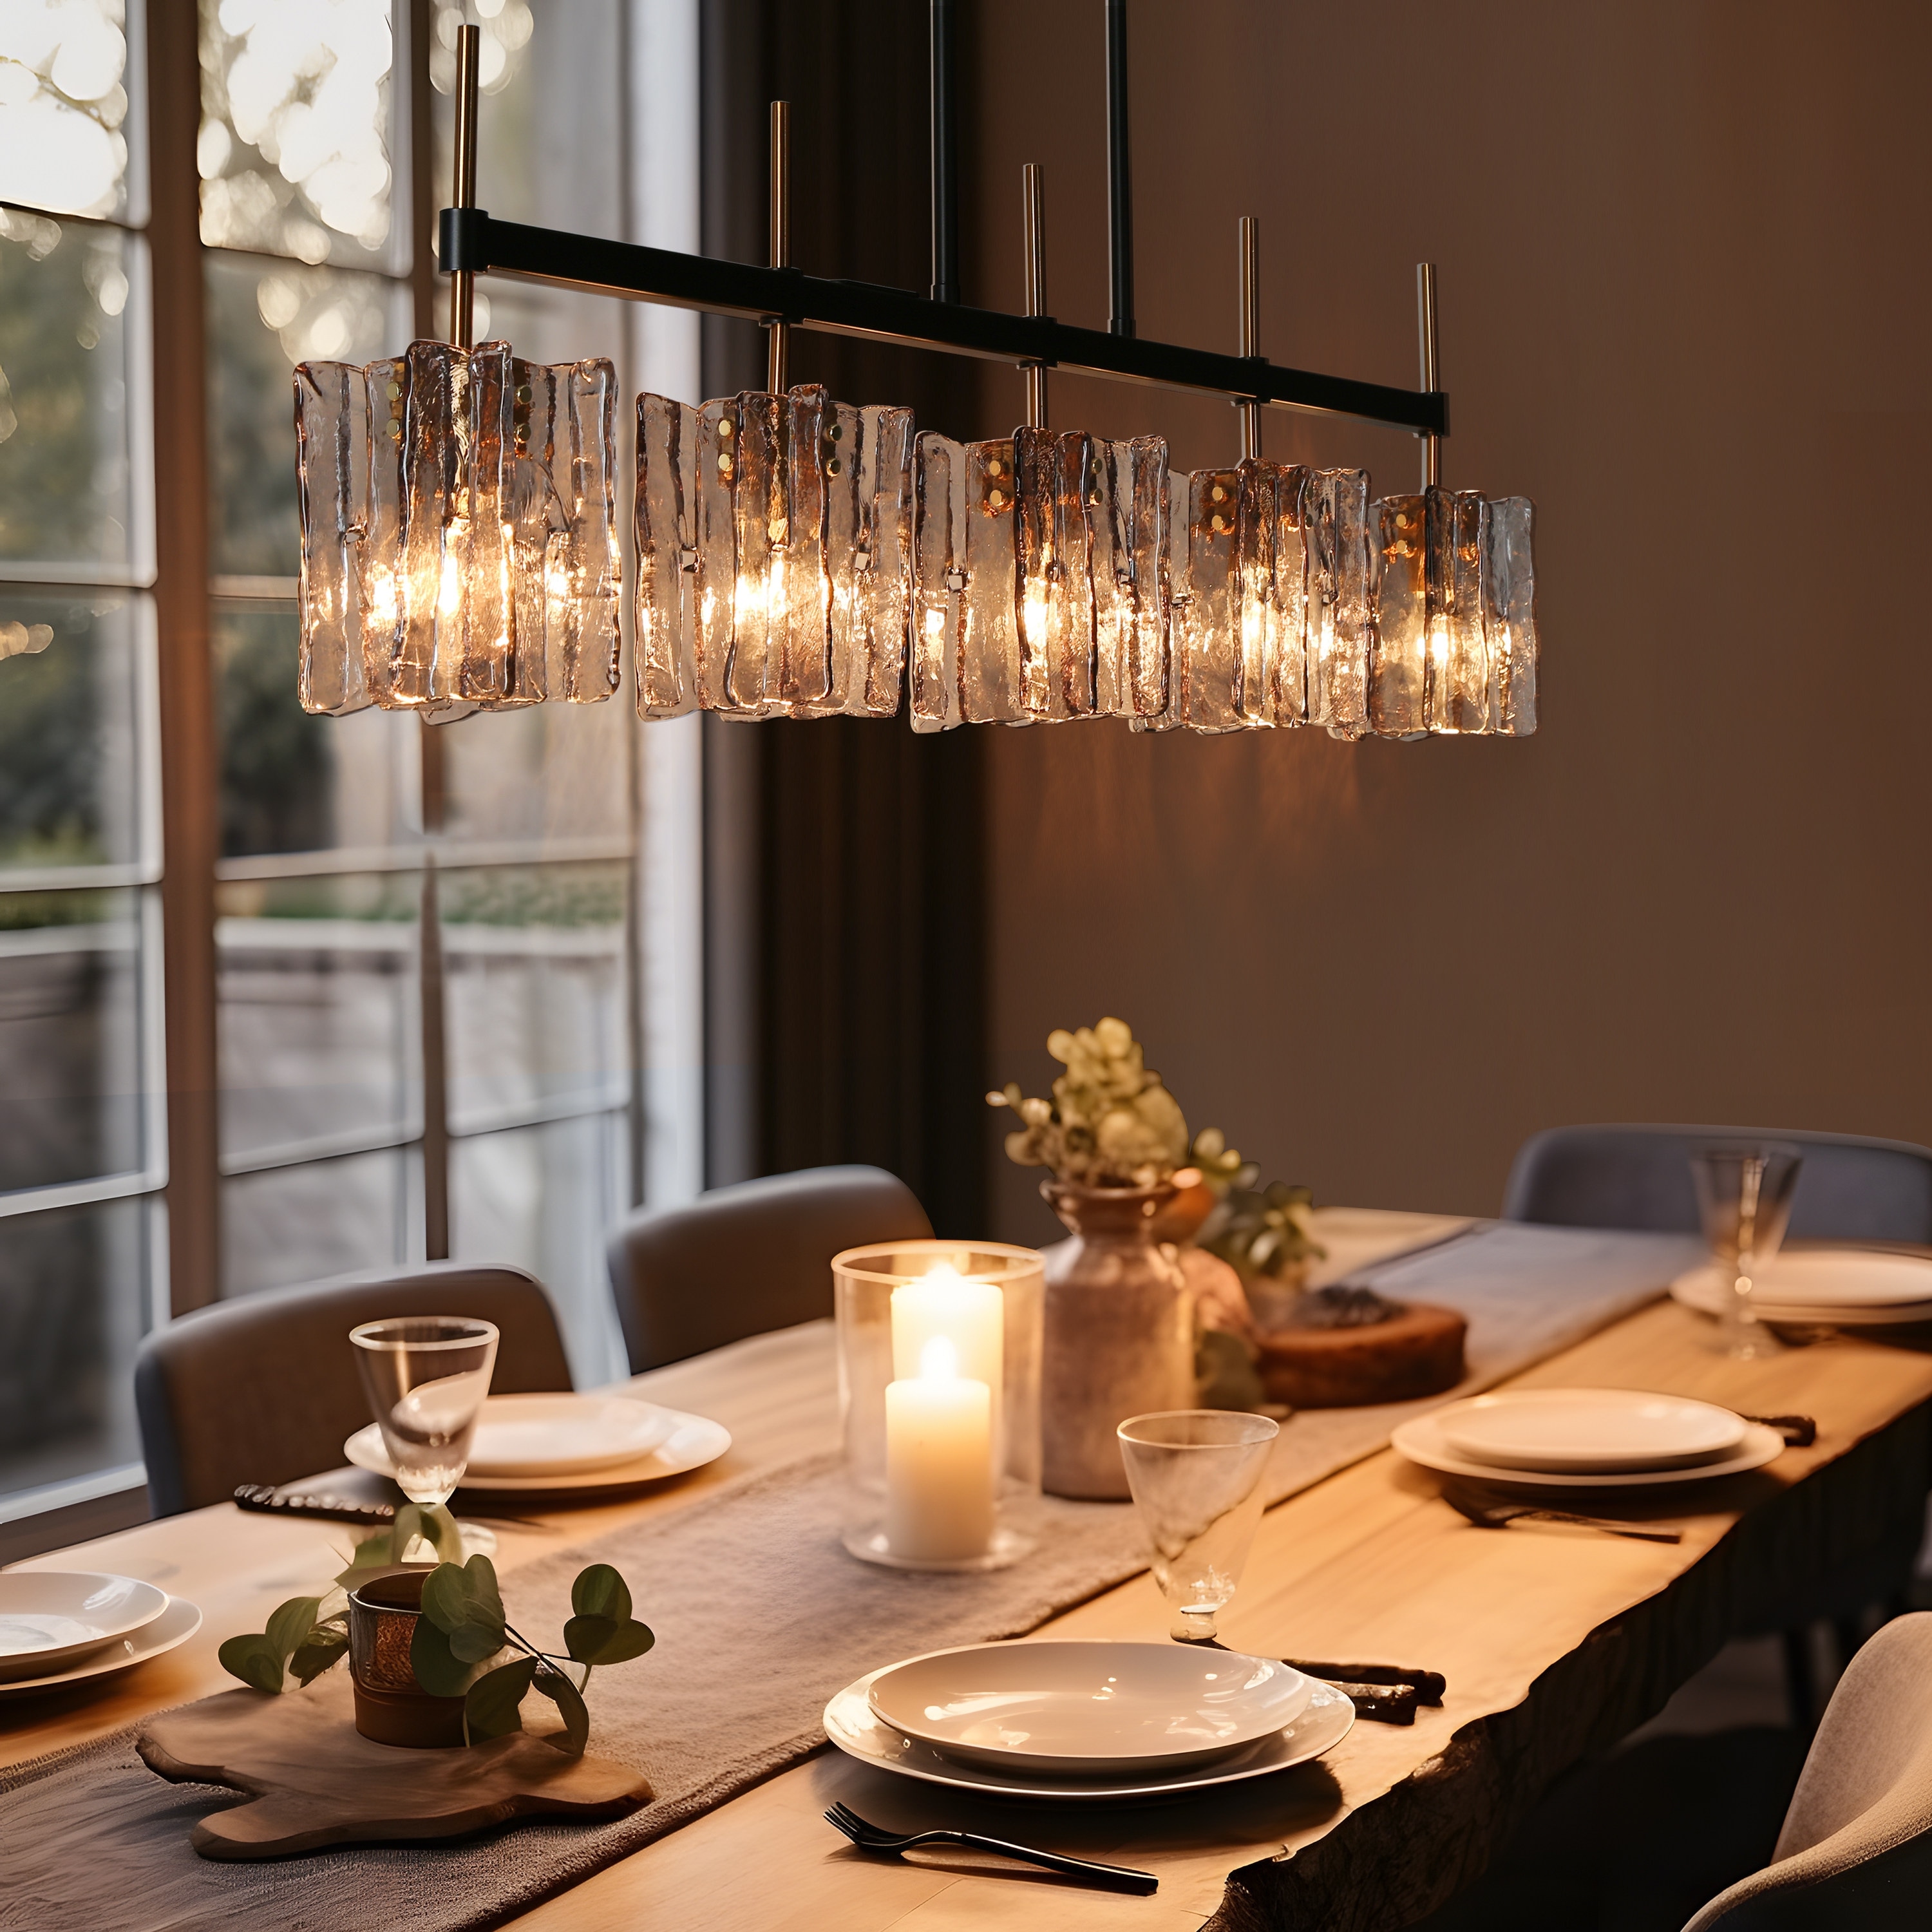 Bistro Four Arm Chandelier in Hand-Rubbed Antique Brass & Black with White  Glass - Ceiling Lights